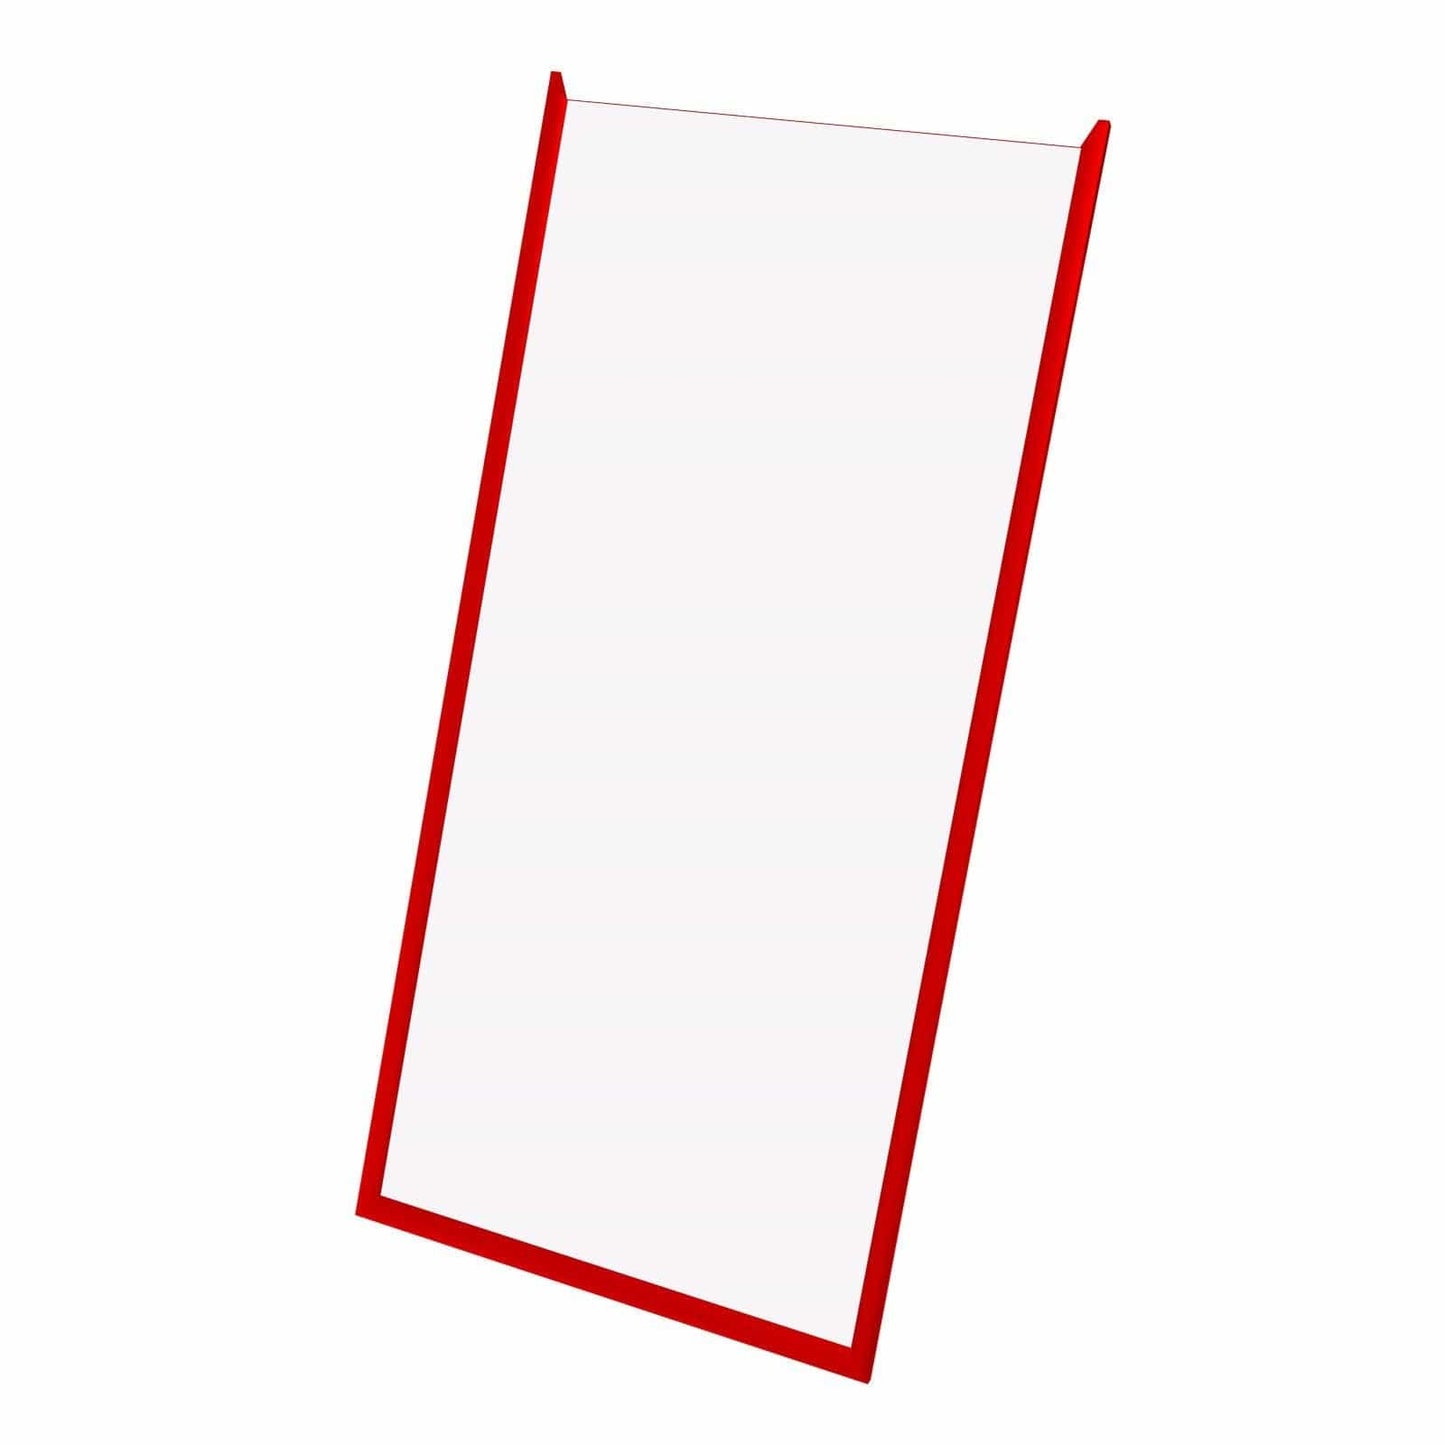 11x24 Red SnapeZo® Snap Frame - 1.2" Profile - Snap Frames Direct